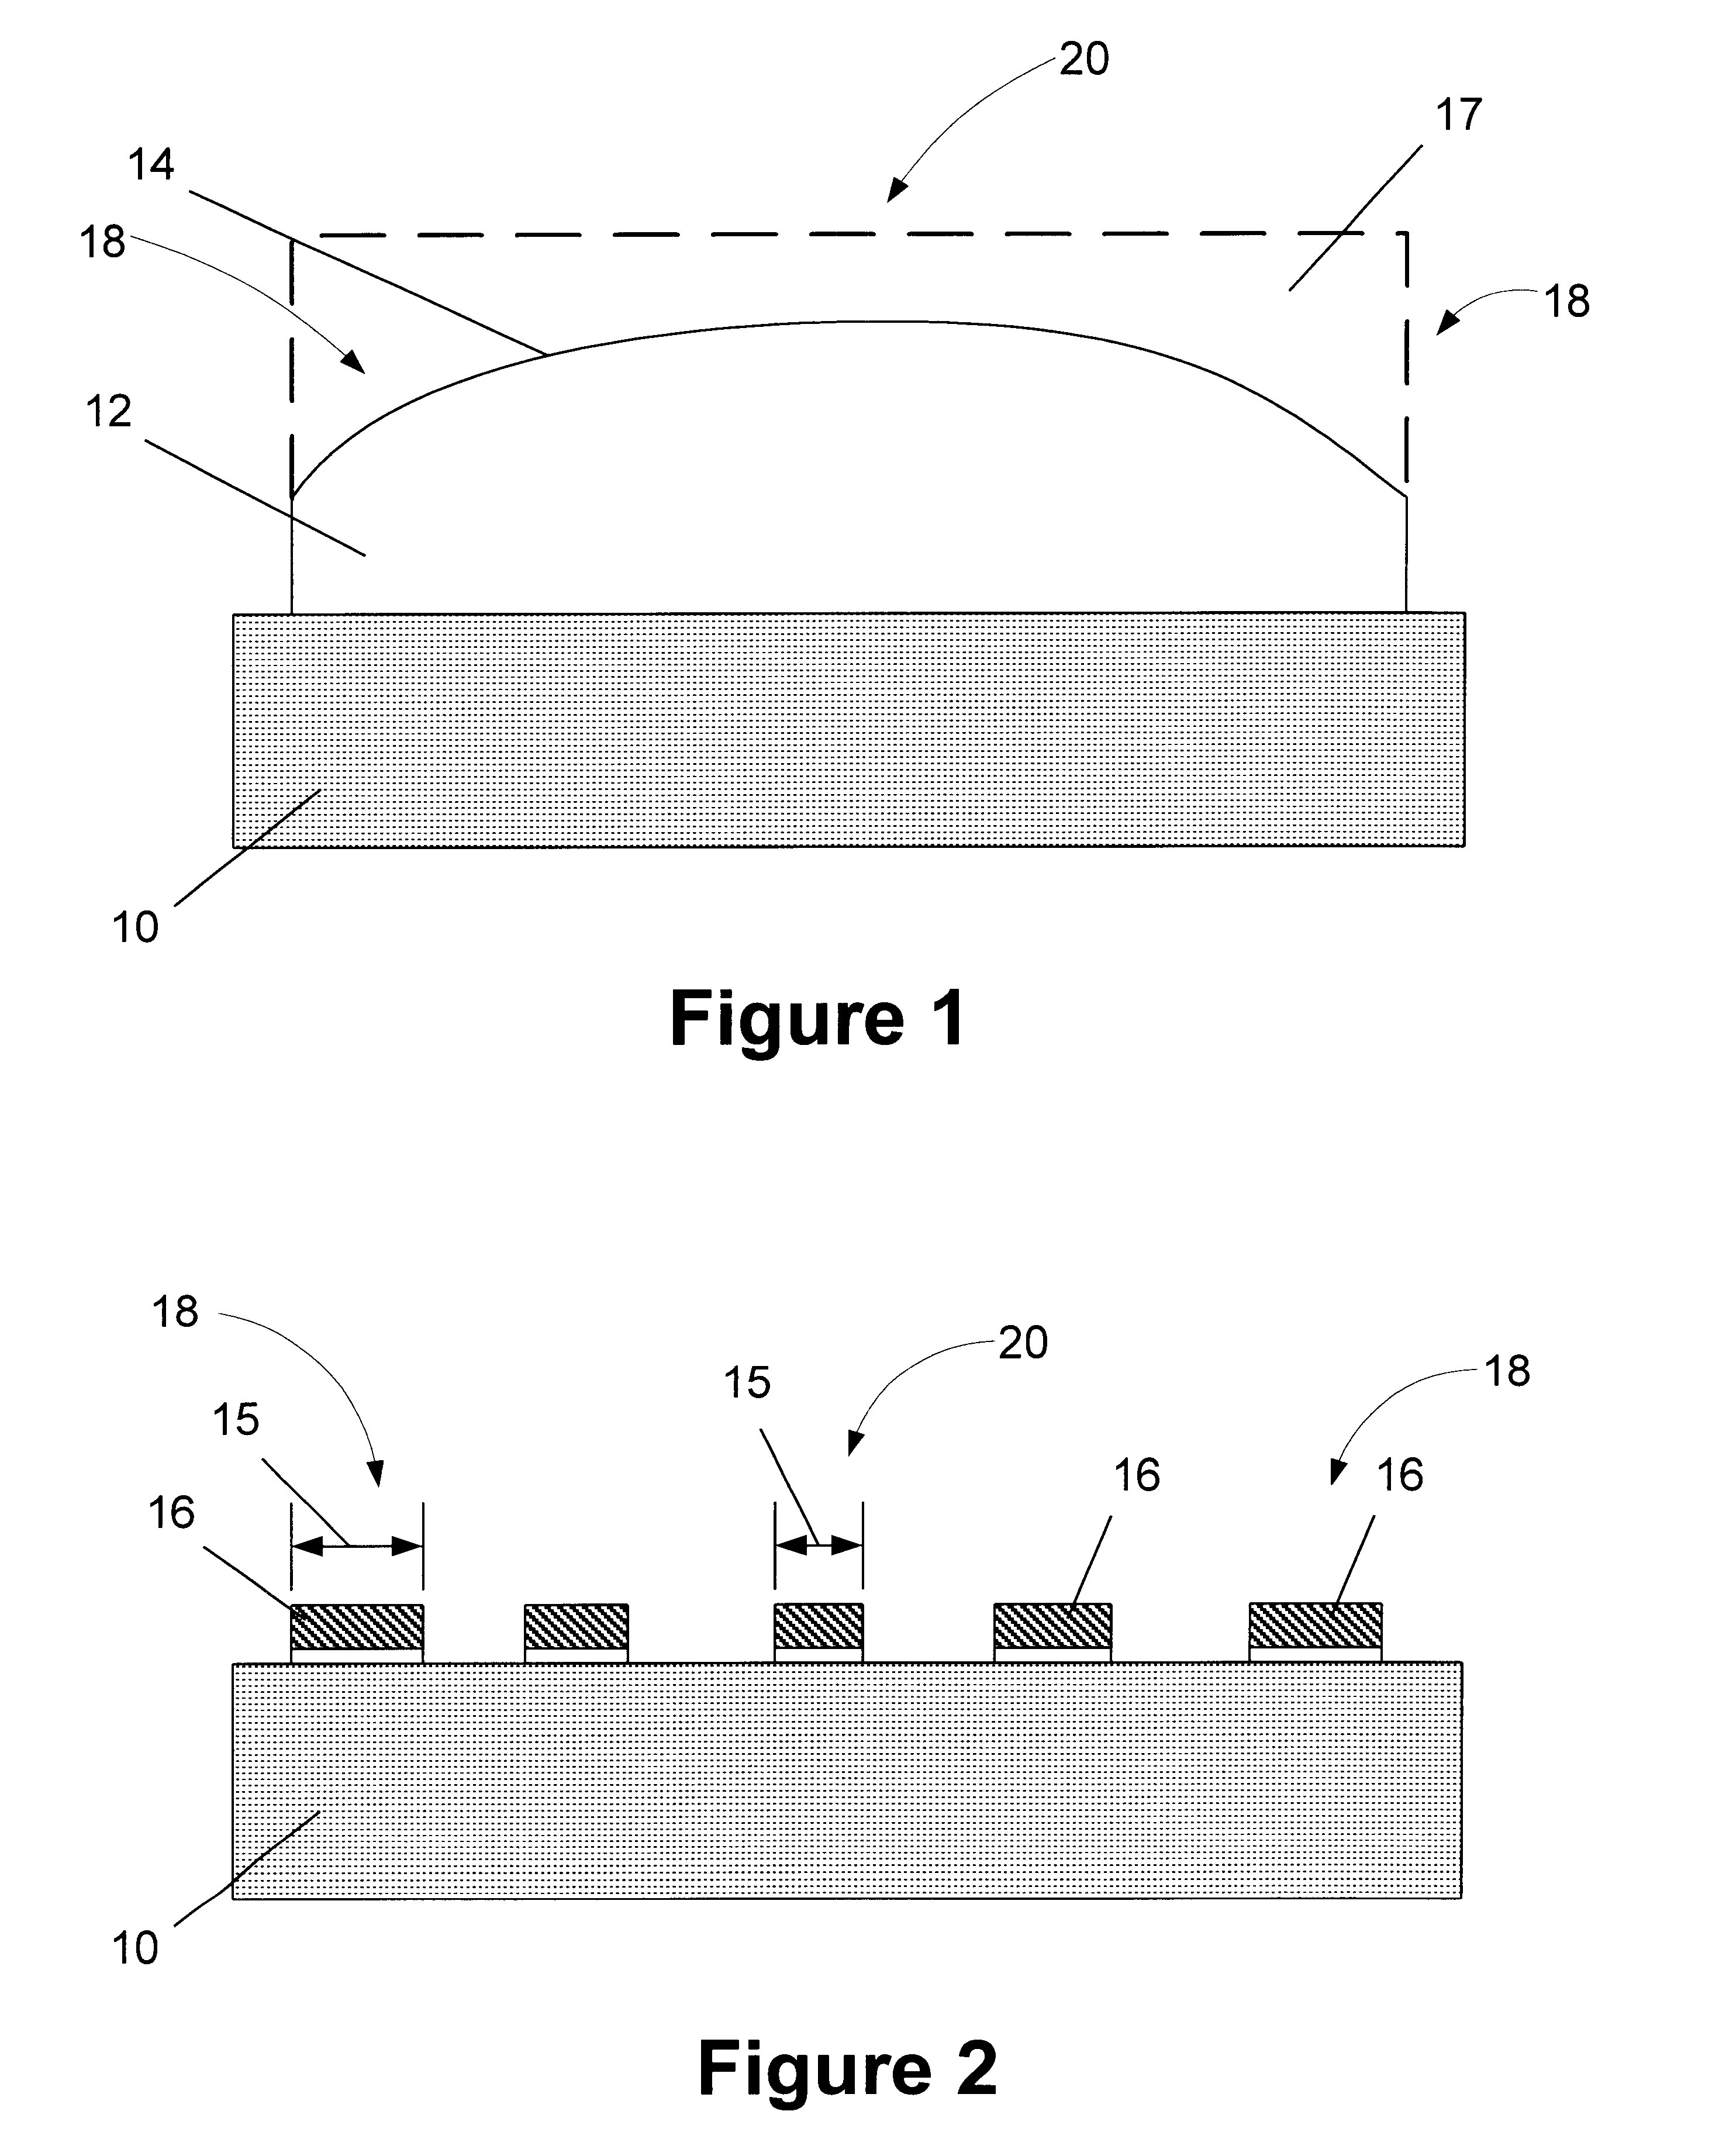 Dynamic lot allocation based upon wafer state characteristics, and system for accomplishing same